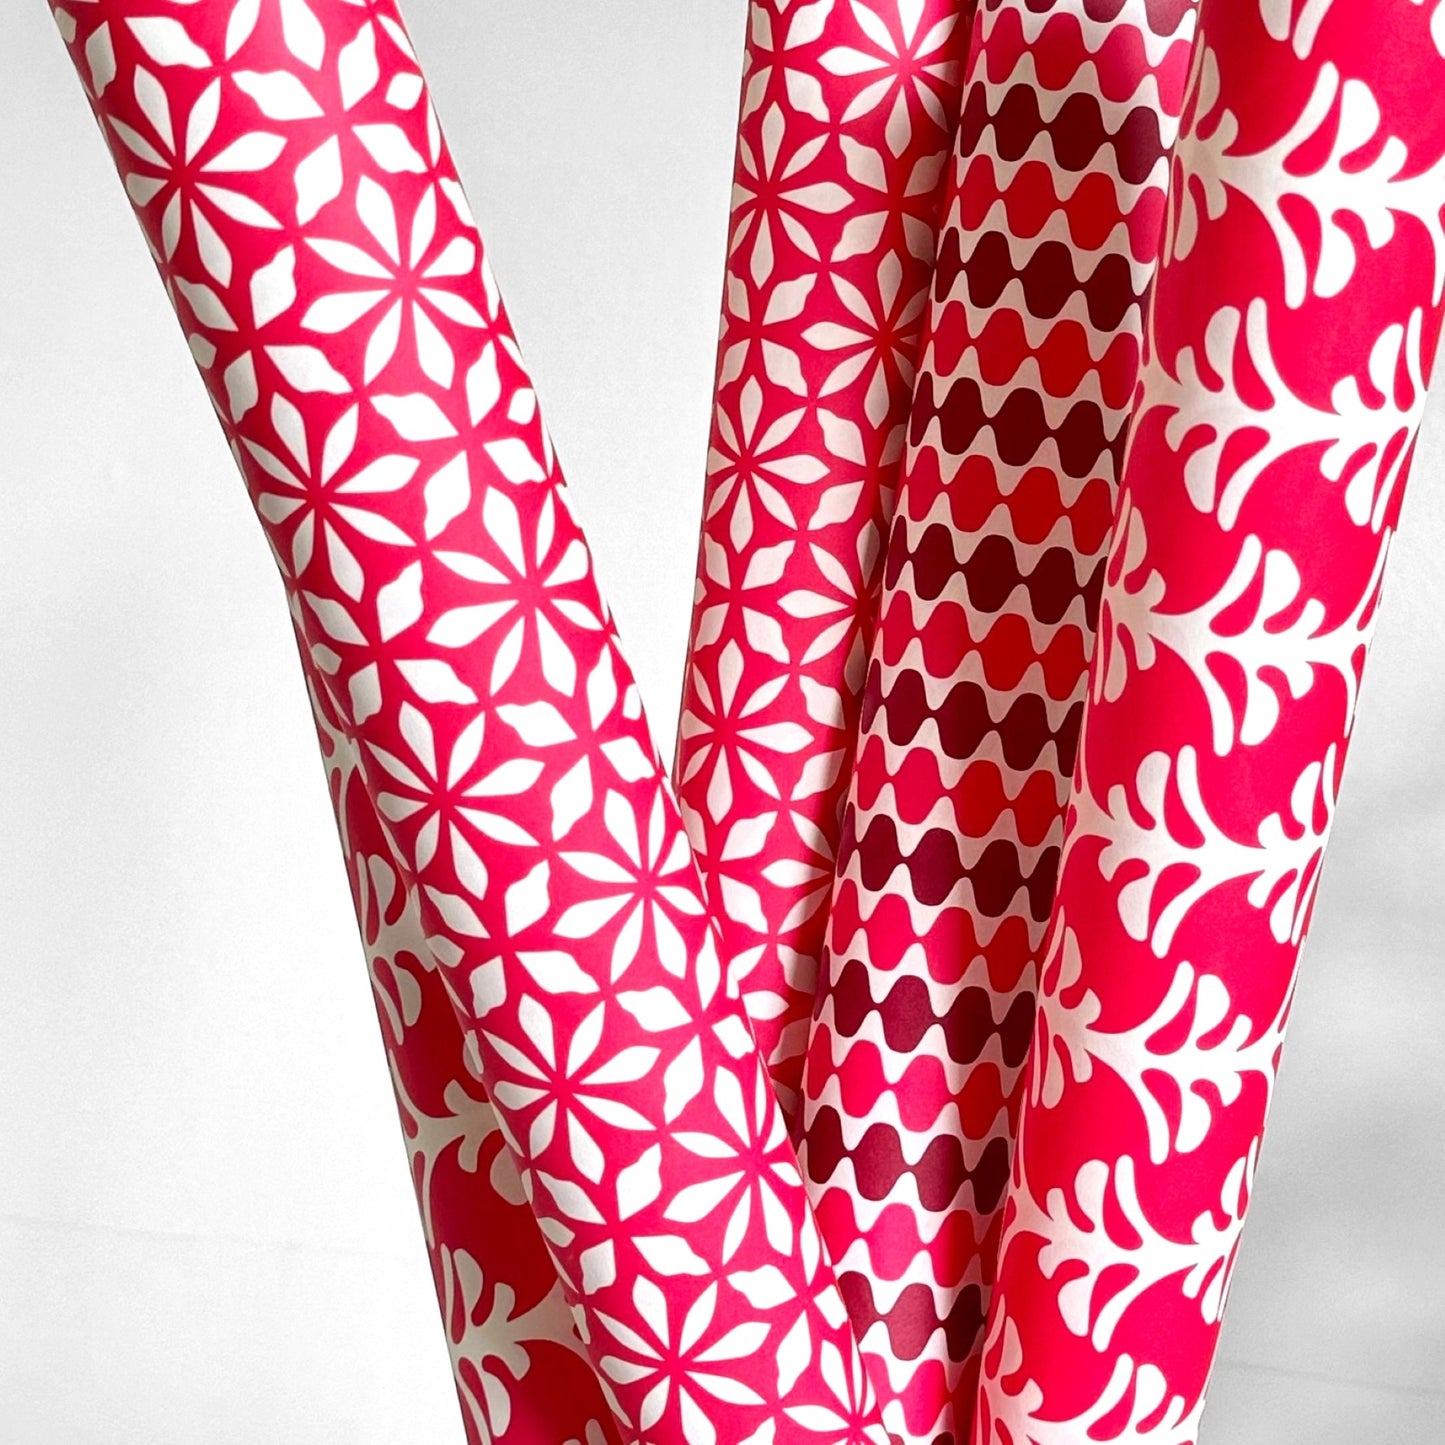 wrapping paper by Otto Editions with a cut-out palm design in white on a hibiscus pink background. Pictured rolled alongside other designs